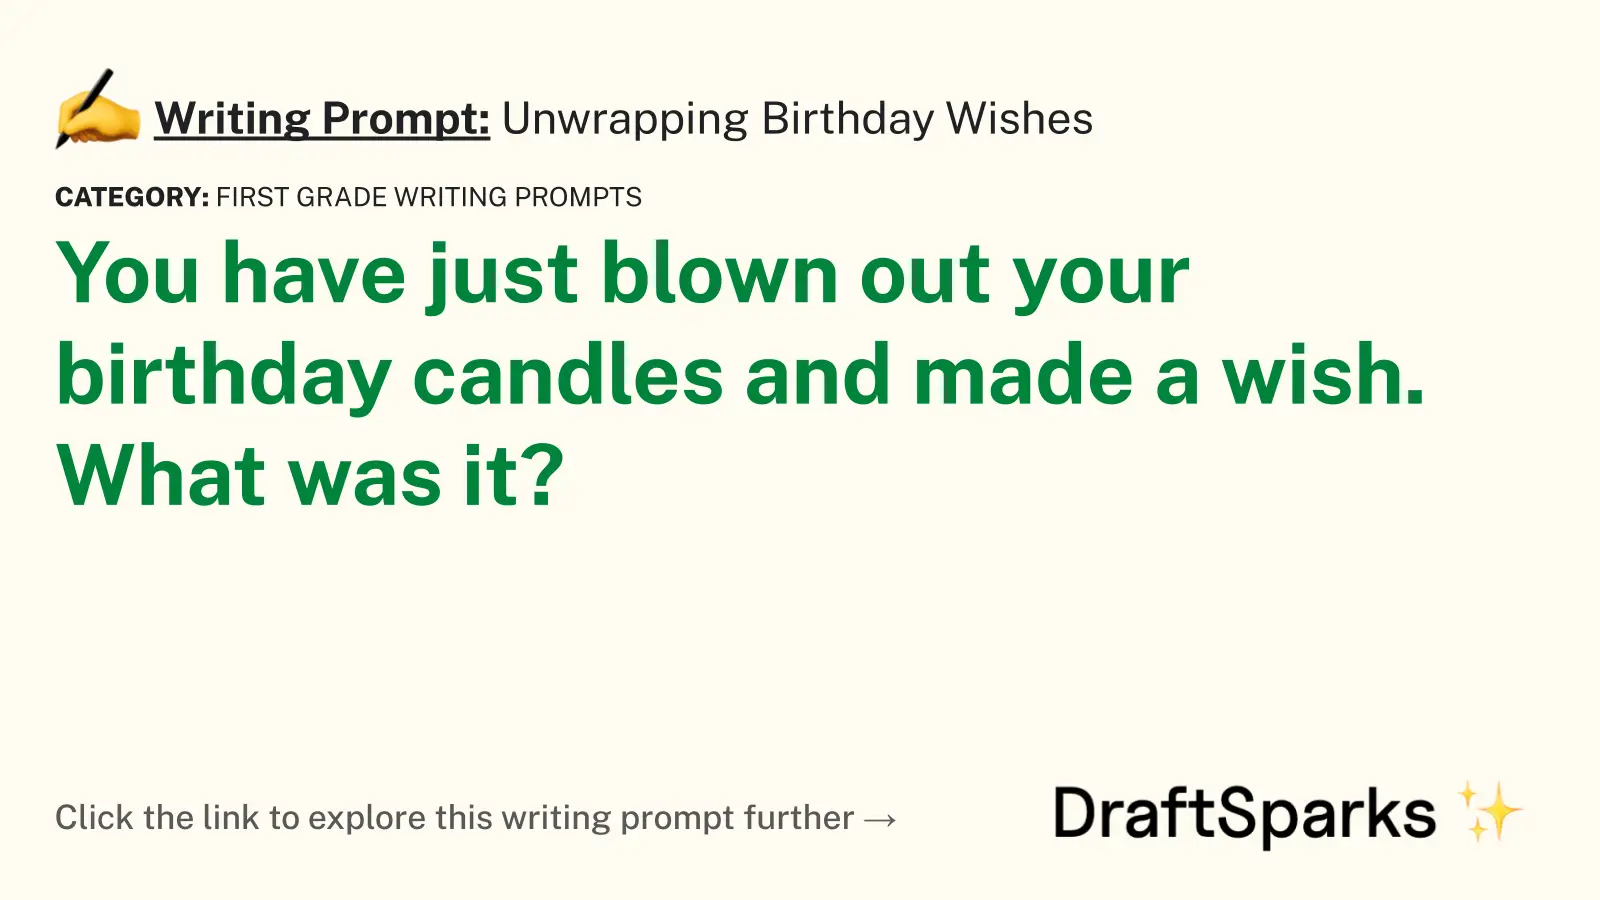 Unwrapping Birthday Wishes